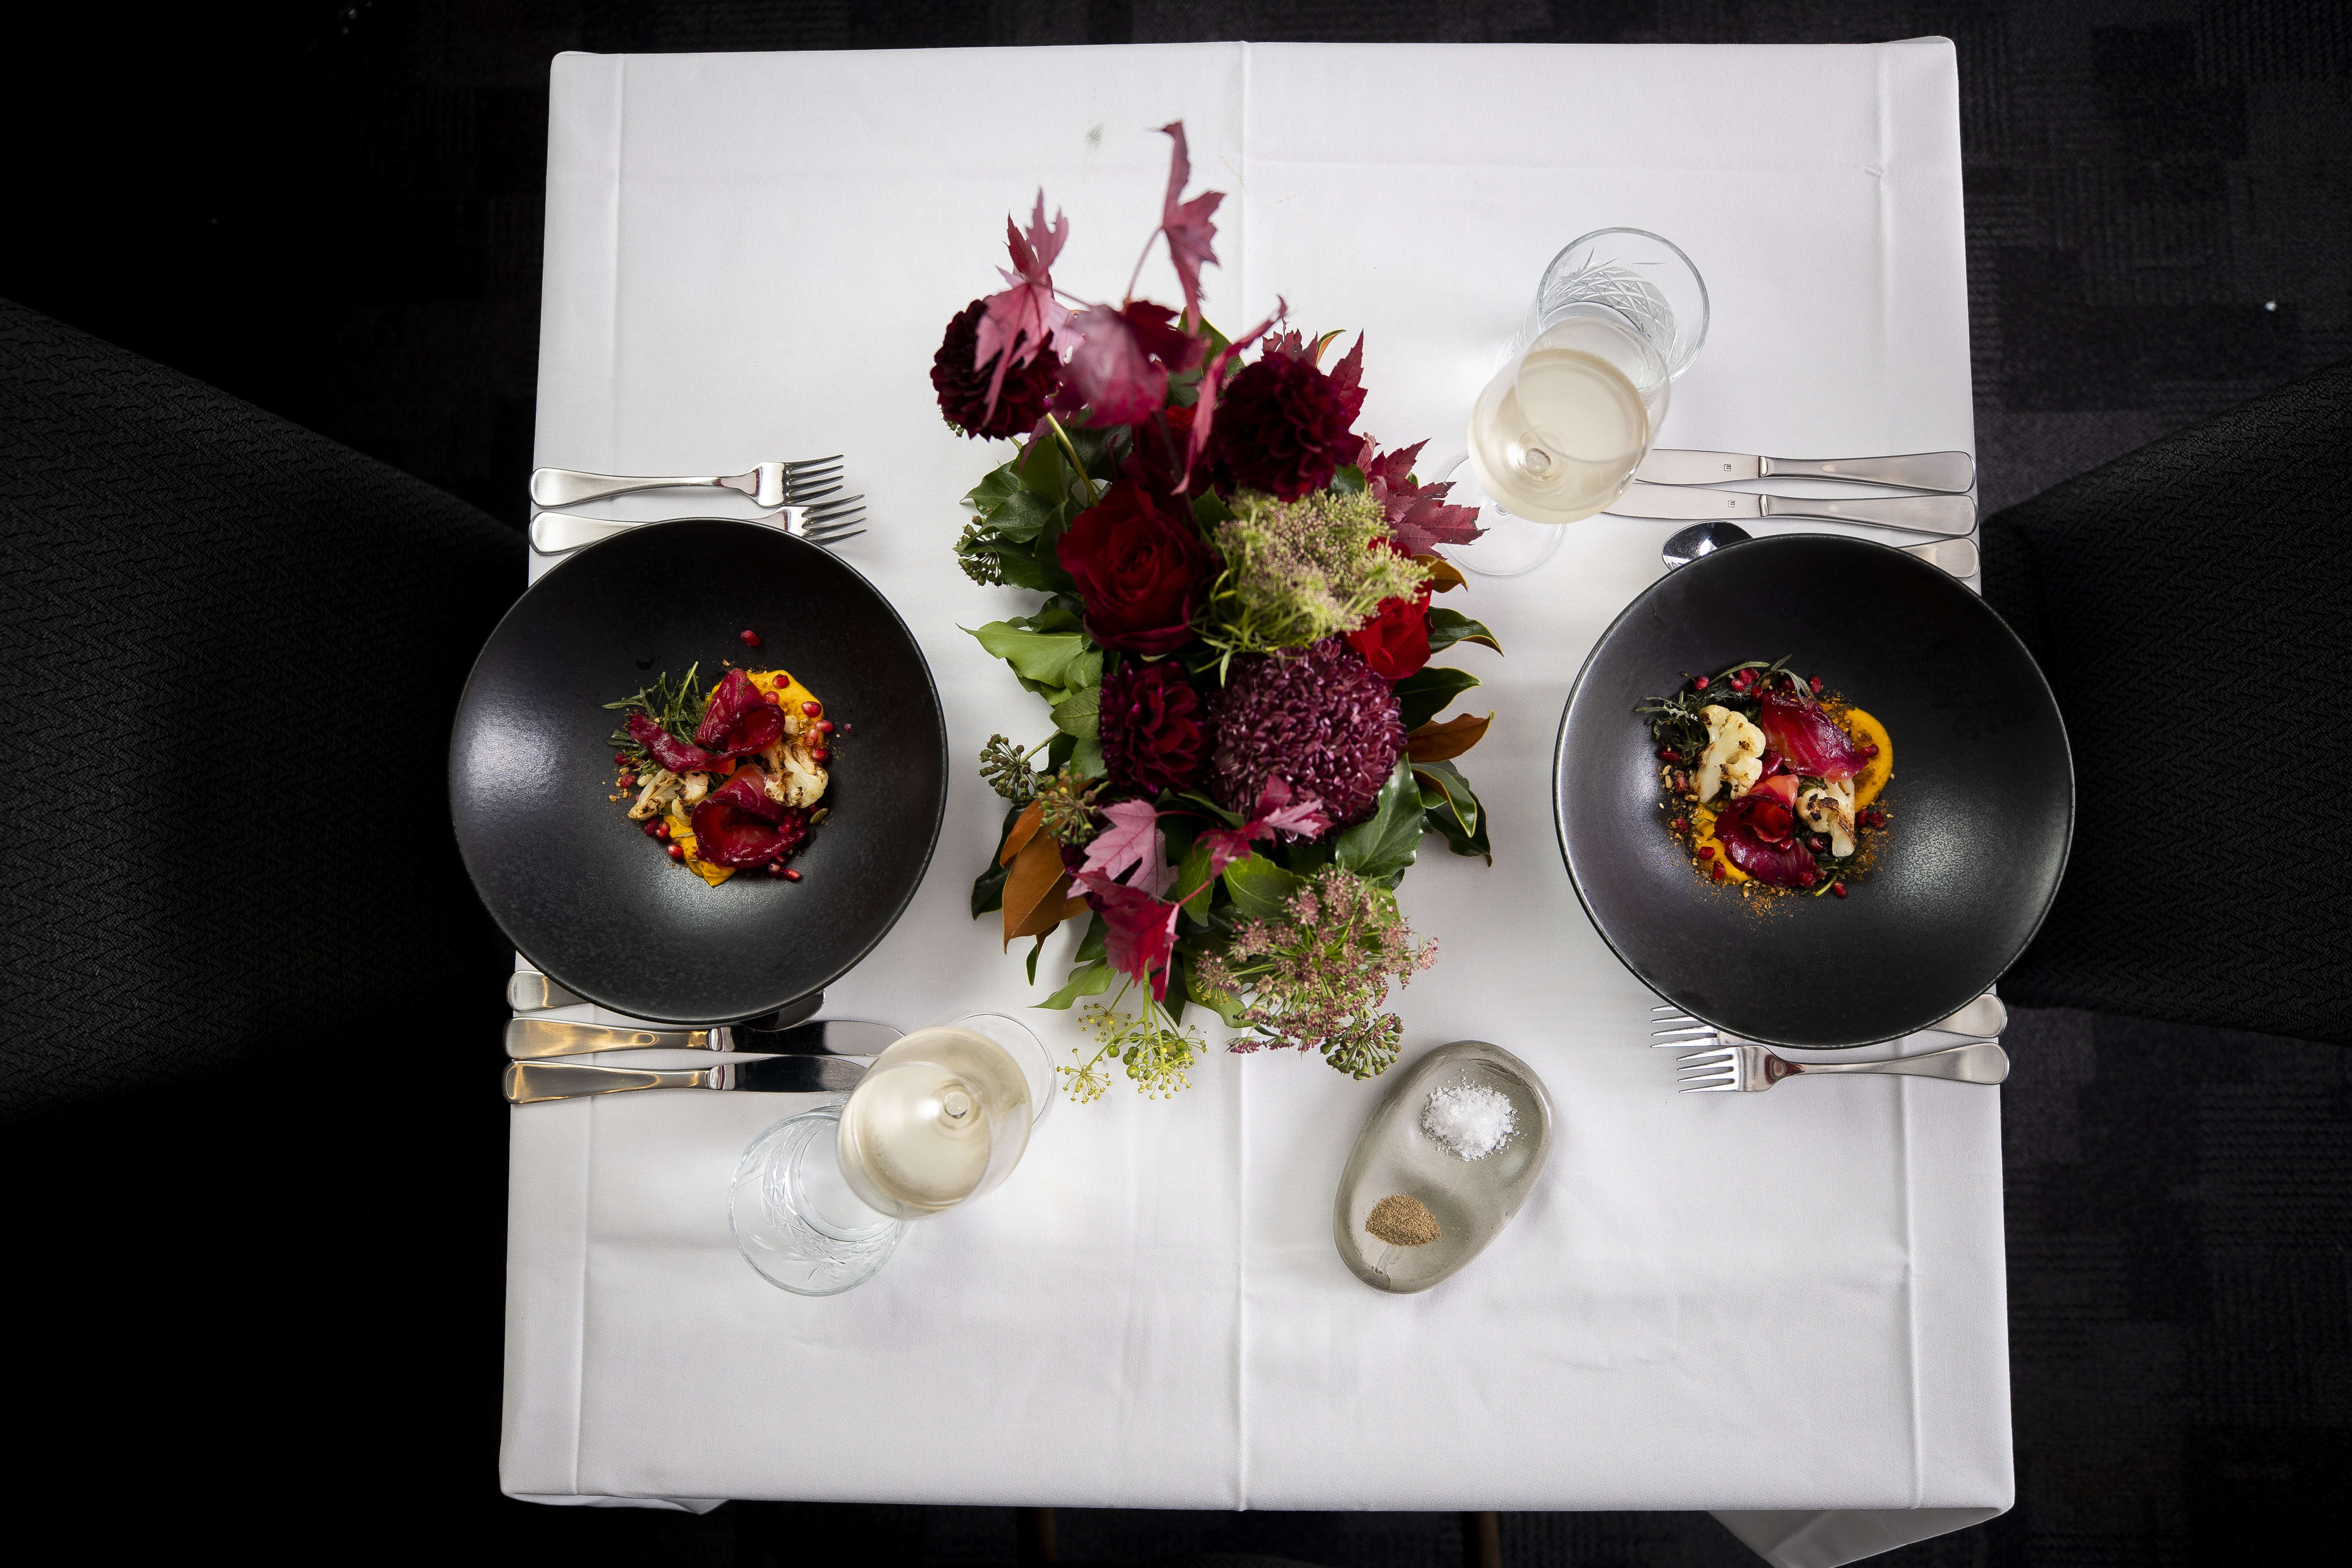 Flat lay photo of a table setting with beetroot cured salmon, cauliflower, carrot puree, pomegranate seeds and dukkaha served in black bowls. Photo: Richard Jupe.